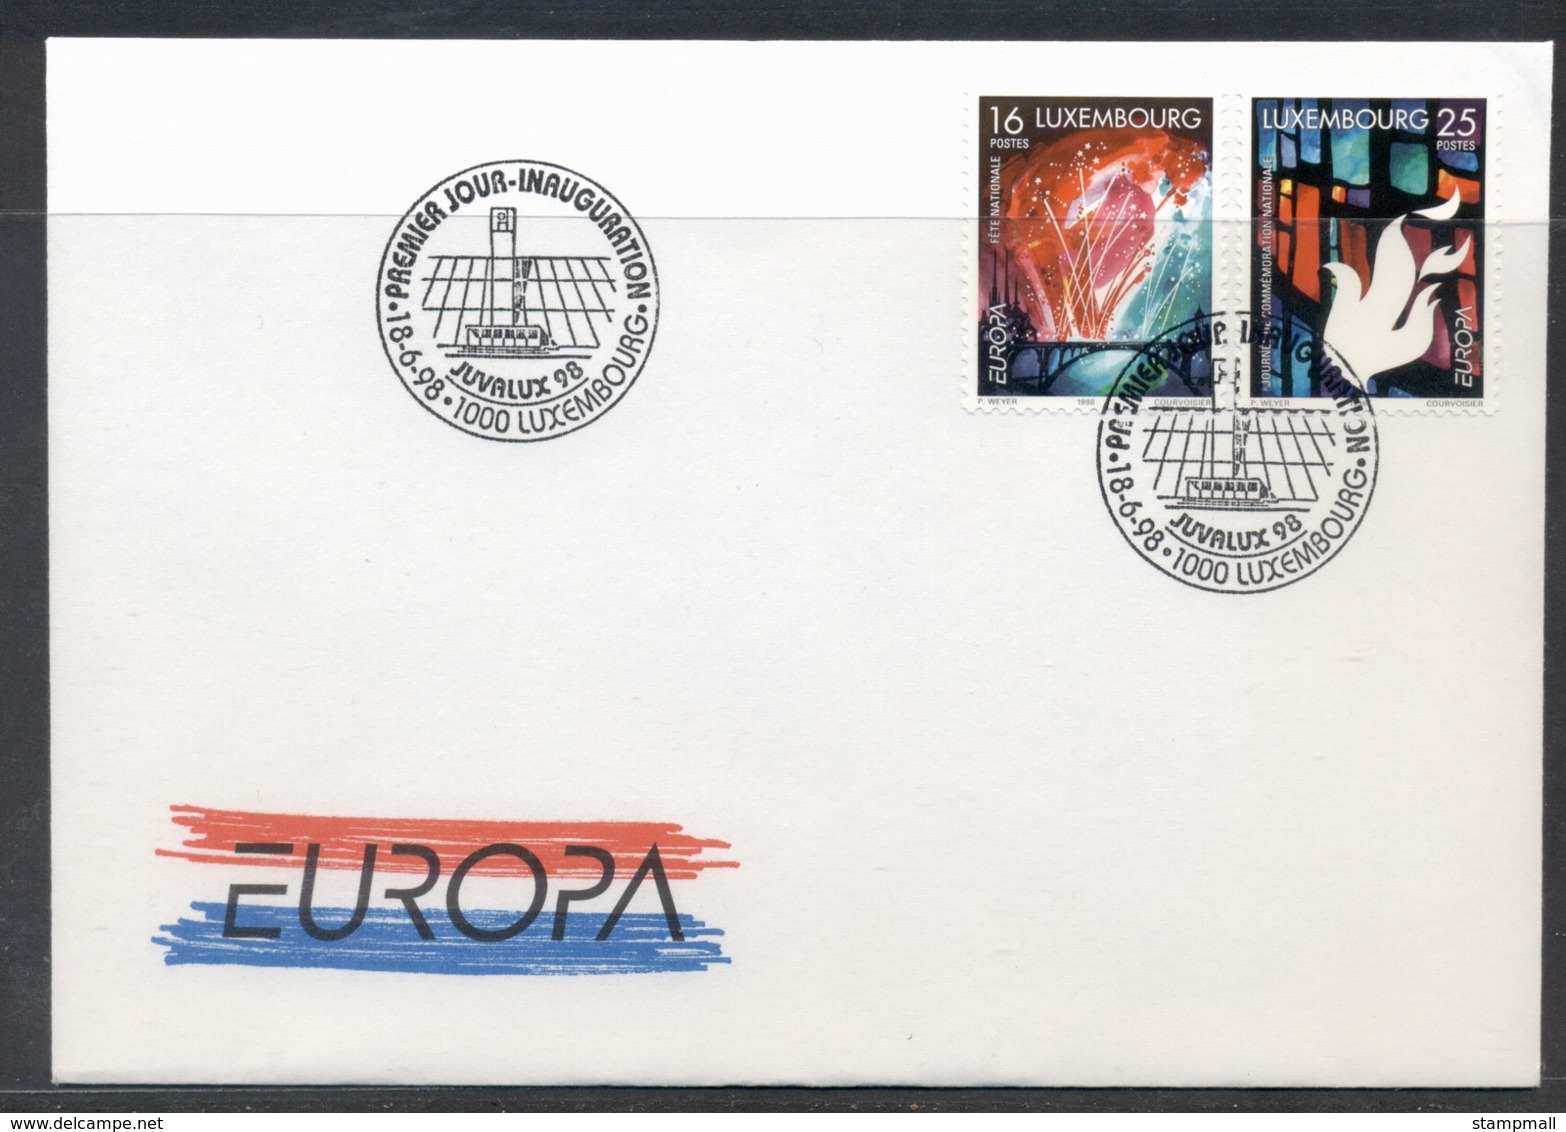 Luxembourg 1998 Europa Holidays & Festivals FDC - FDC